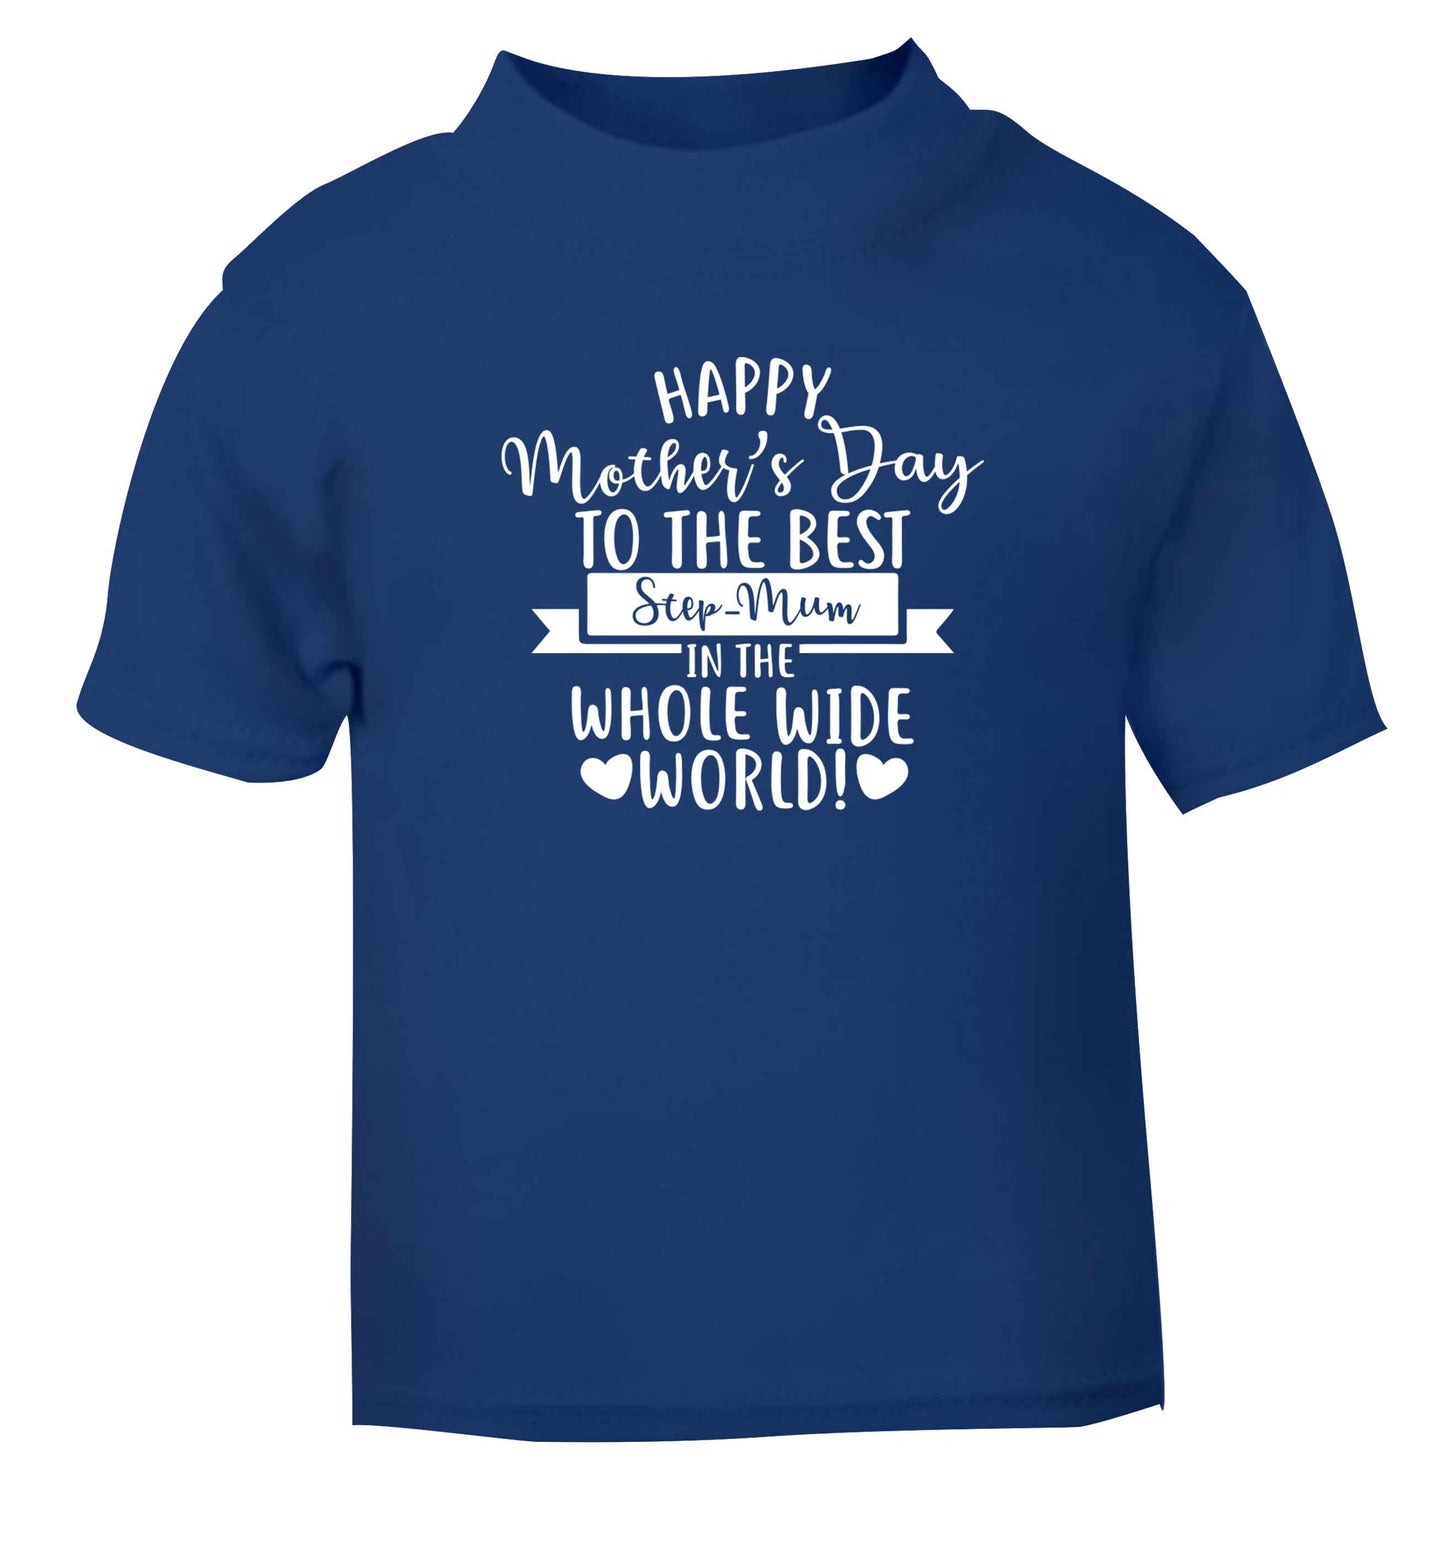 Happy mother's day to the best step-mum in the world blue baby toddler Tshirt 2 Years